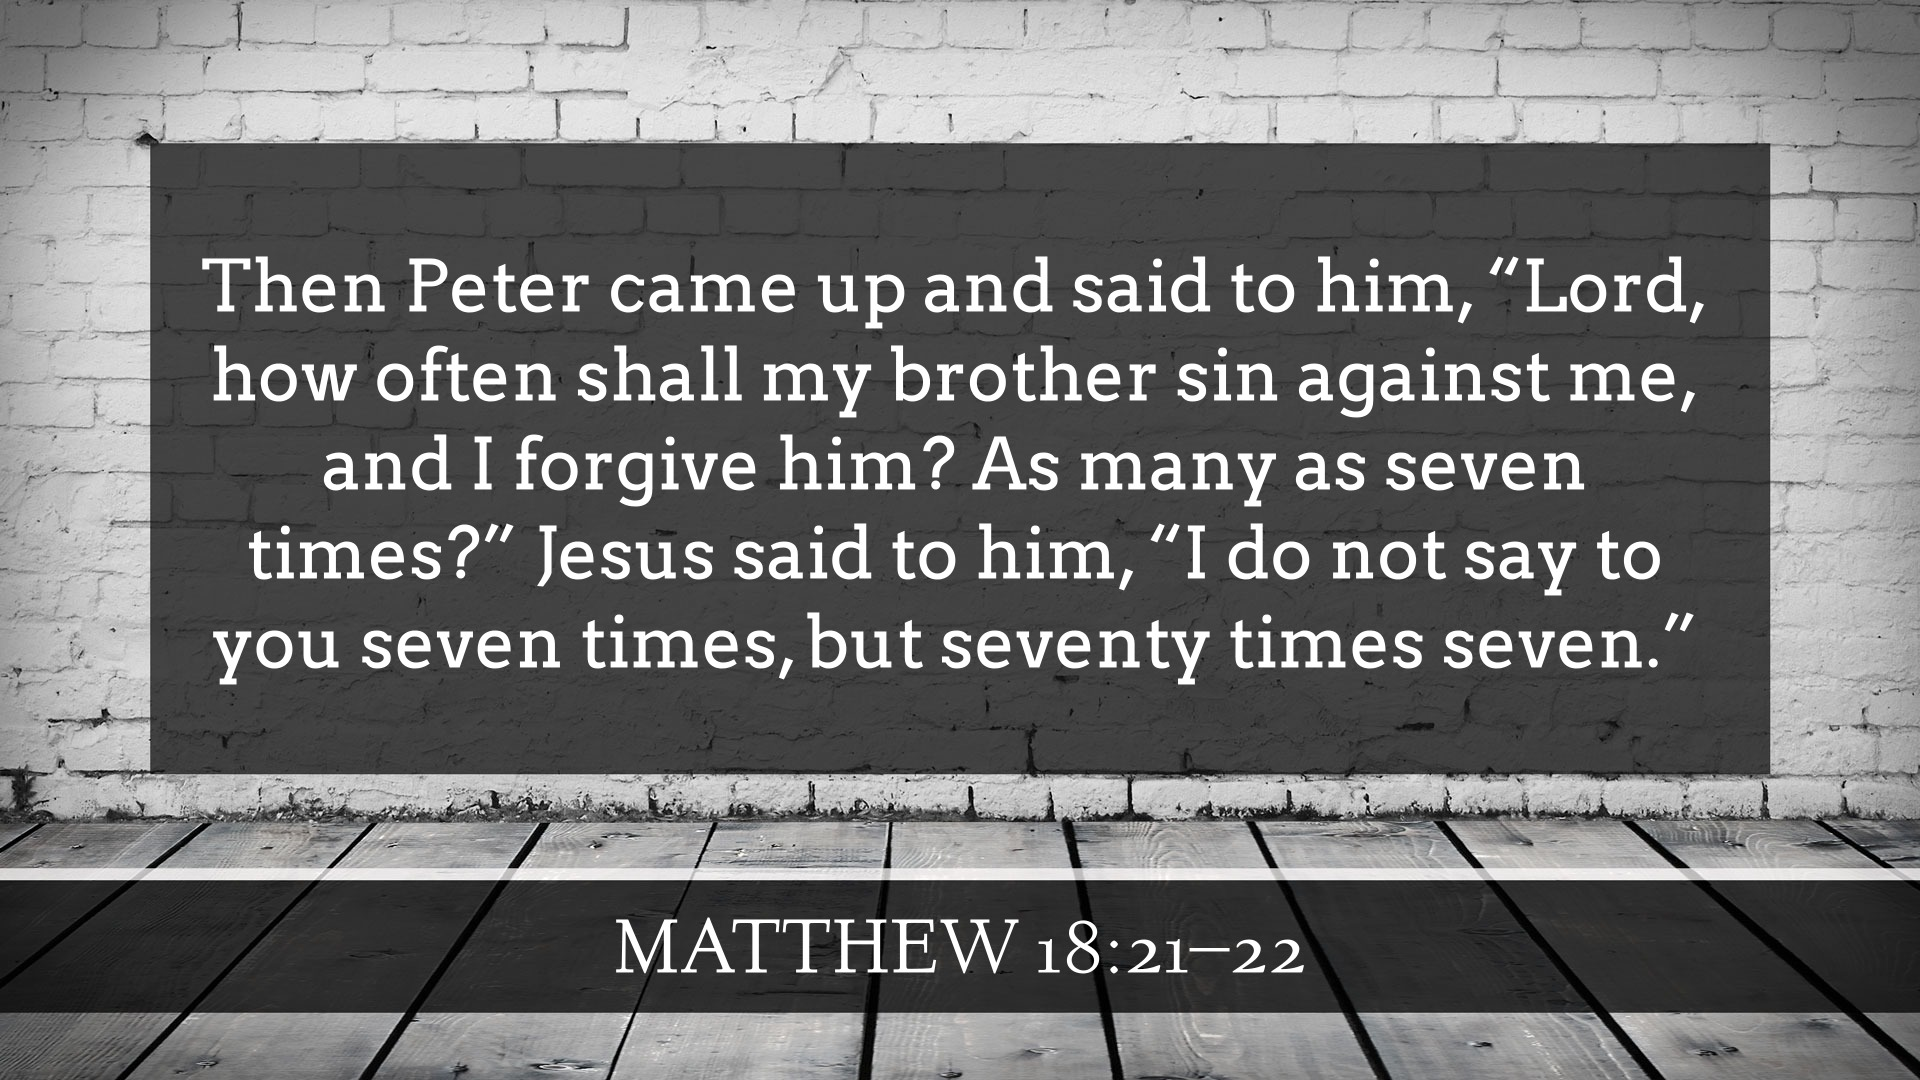 Then Peter came up and said to him, “Lord, how often shall my brother sin against me, and I forgive him? As many as seven times?” 22 Jesus said to him, “I do not say to you seven times, but seventy times seven.